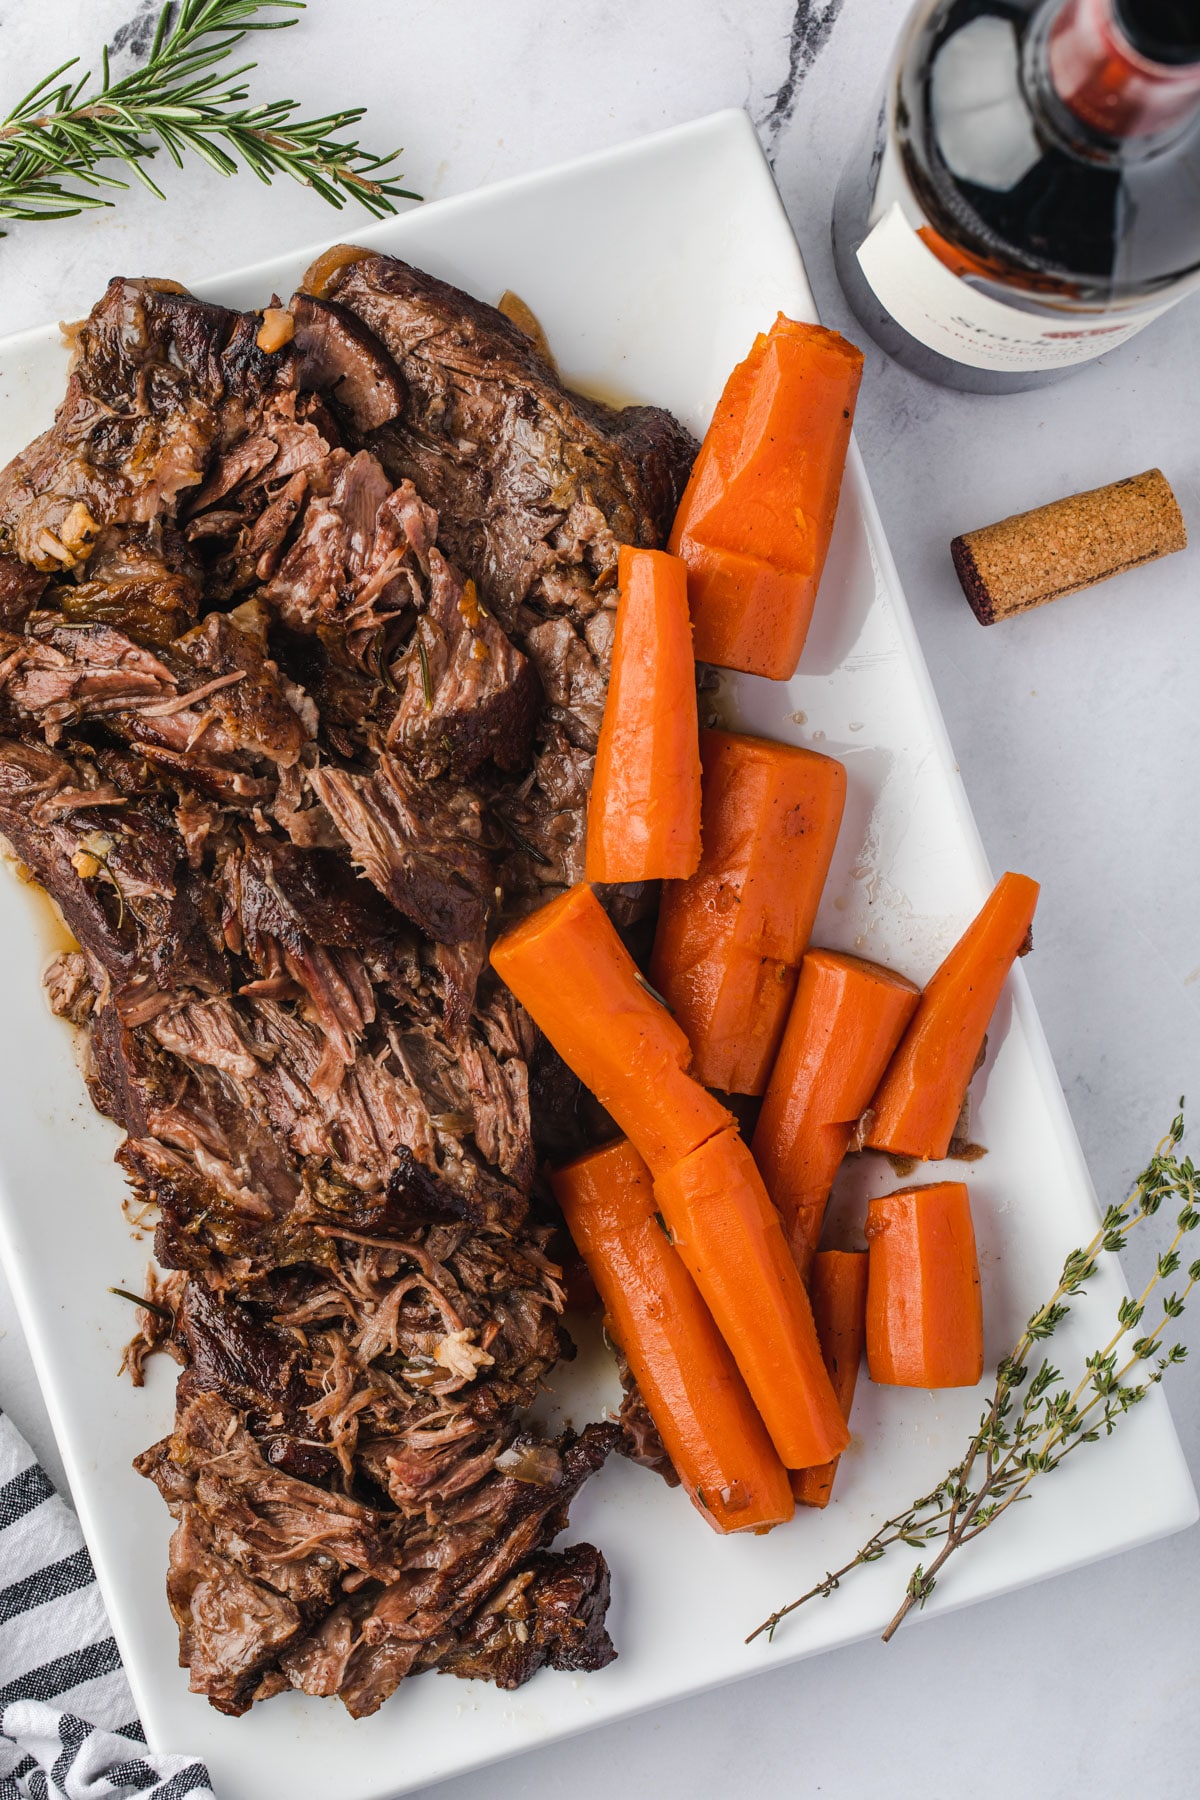 Shredded tender pot roast on a rectangular tray with roasted carrots and a bottle of red wine.